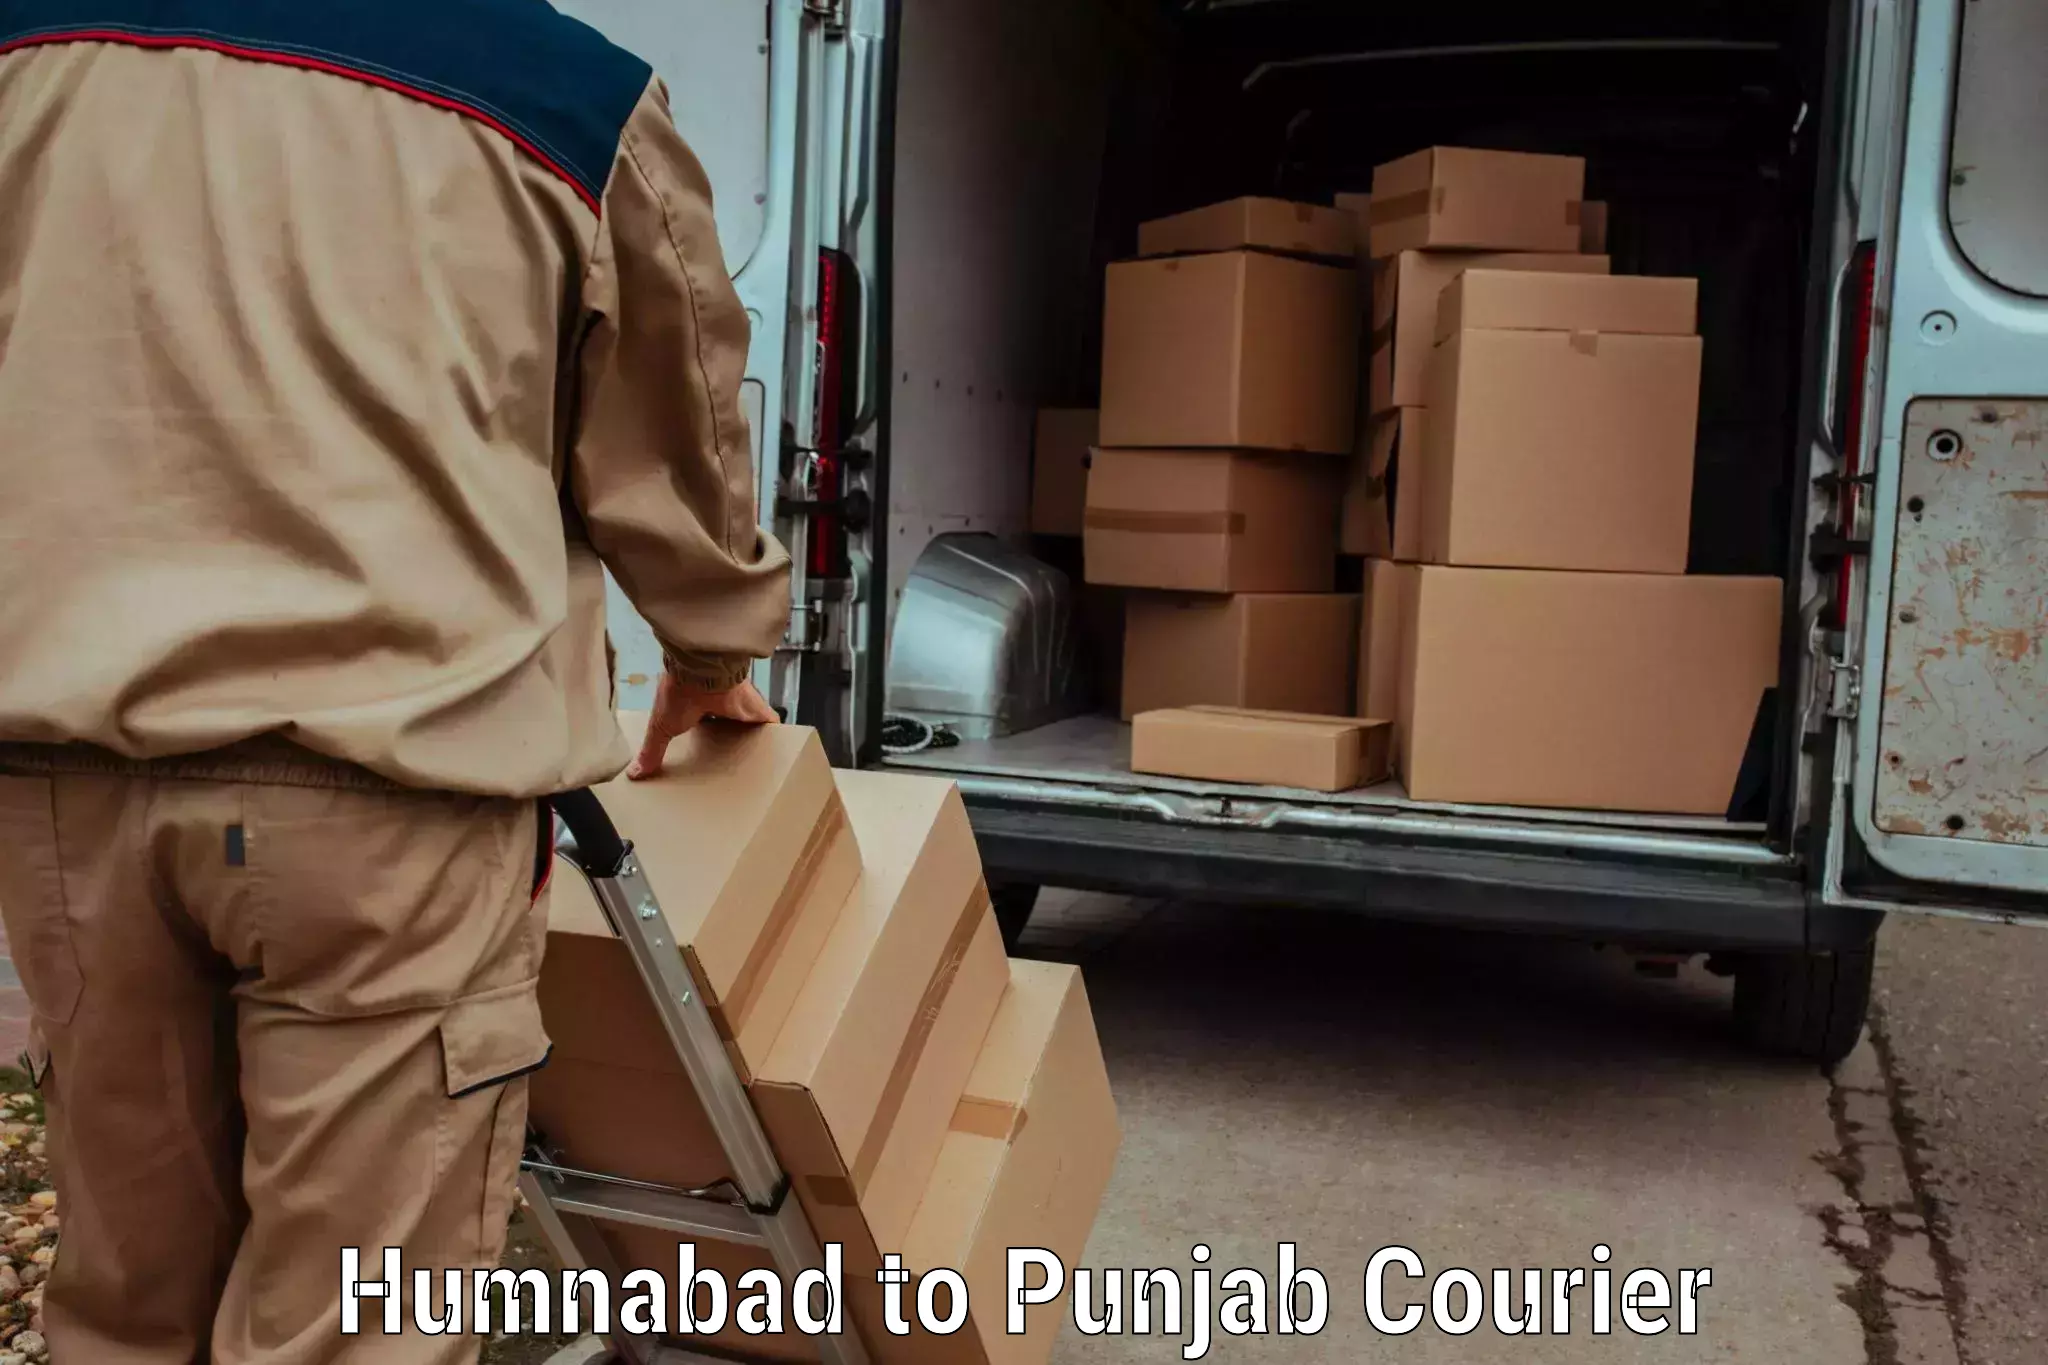 Premium courier services Humnabad to Punjab